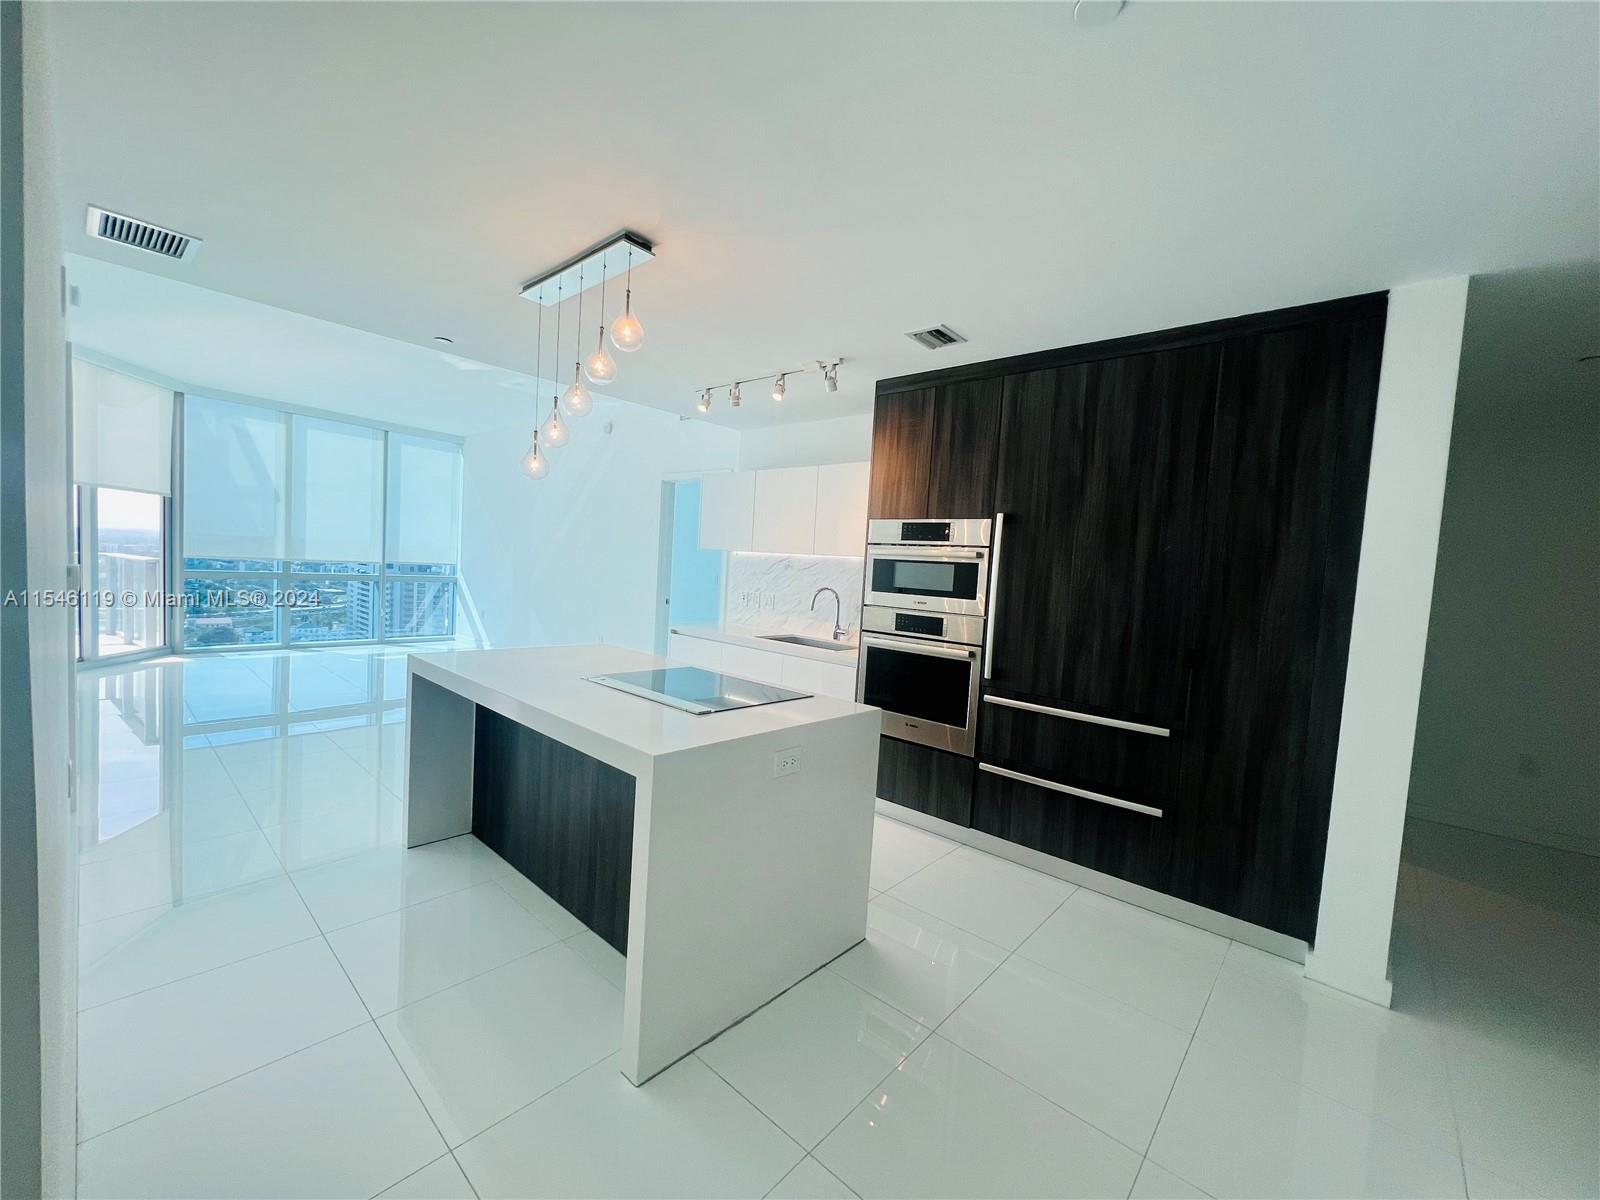 BEAUTIFUL 2BD+HUGE DEN W/CLOSET THAT CAN BE A 3rd BED, 3 BATHS CONDO AT LUXURY PARAMOUNT MIAMI WORLD CENTER. OVER SIZED BALCONY OVERLOOKING MIAMI SKYLINE, PRIVATE ELEVATOR. WALKING DISTANCE TO VIRGIN TRAIN STATION, METRO MOVER, BAYSIDE, PORT OF MIAMI, KASEYA CENTER, ART MUSEUM. SHORT DRIVE TO MIAMI INT'L AIRPORT, BRICKELL, WYNWOOD AND MIAMI BEACH. HOA INCLUDES INTERNET AND CABLE, WATER, AND TRASH REMOVAL. ONE ASSIGNED PARKING SPACE AND ONE COMPLIMENTARY VALET. PLENTY OF LUXURY AMENITIES AND SERVICES. FIVE POOLS, BASKETBALL COURT, BOXING COURT, RACQUETBALL, YOGA, SAUNA, SPA, ULTIMATE GYM, BBQ KITCHEN, VIRTUAL GOLF, RECORDING STUDIO, KIDS PLAY AREA.  SOCCER FIELD, TENNIS COURT, SKY DECK, OBSERVATORY. JACUZZI ON 53rd FLOOR OVERLOOKING MIAMI SKYLINE. 24 HRS CONCIERGE, VALET PARKING, SECURITY.